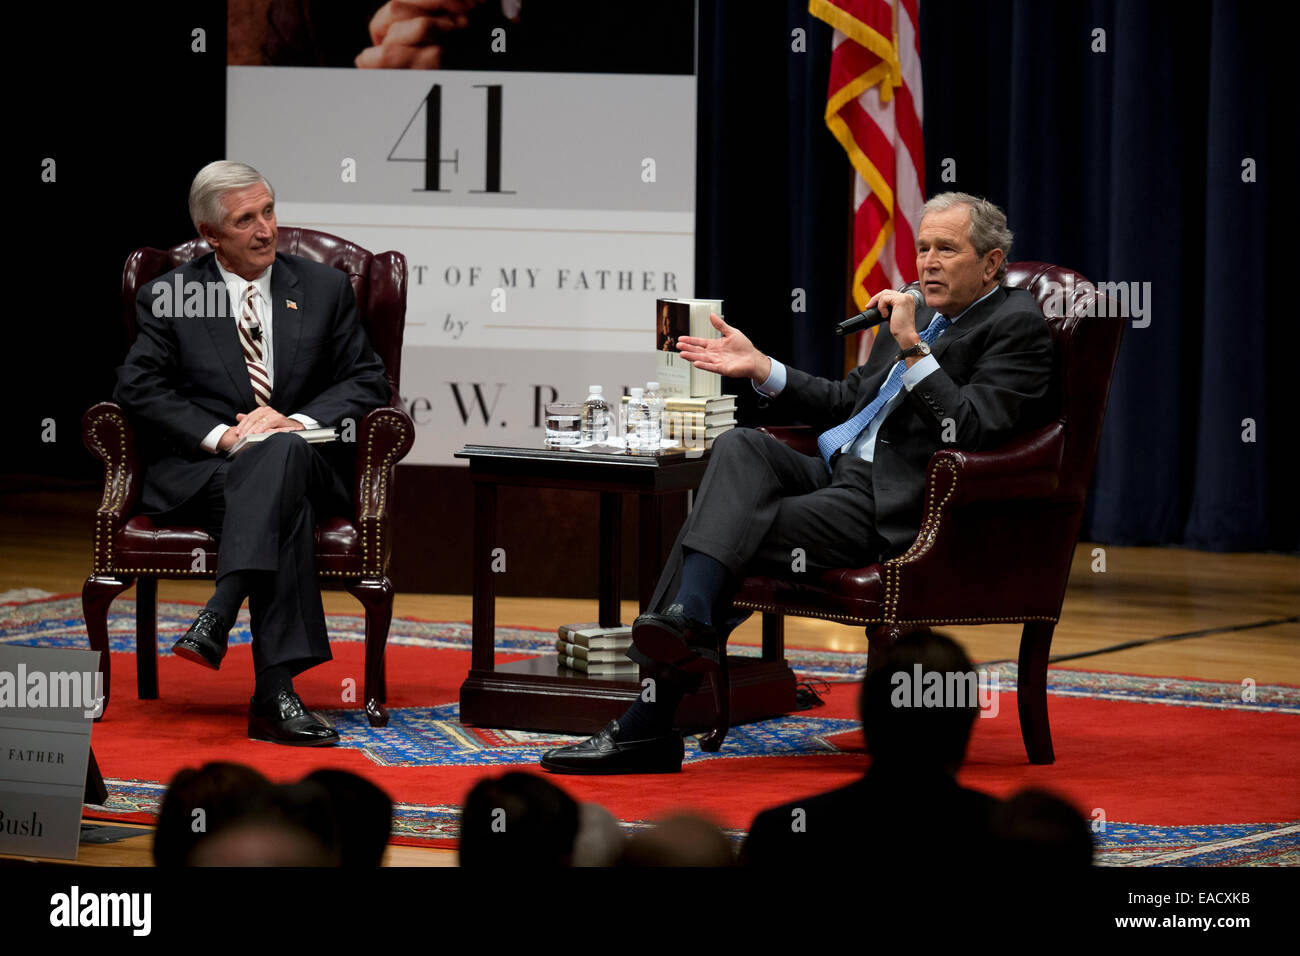 College Station, Texas, USA. 11th November, 2014. Former U.S. President George W. Bush talks about his new book, '41 A Portrait of My Father' wiith former chief of staff Andrew Card during a book event at the Bush Library at Texas A&M University. The elder George H.W. Bush and wife Barbara were in the audience. Credit:  Bob Daemmrich/Alamy Live News Stock Photo